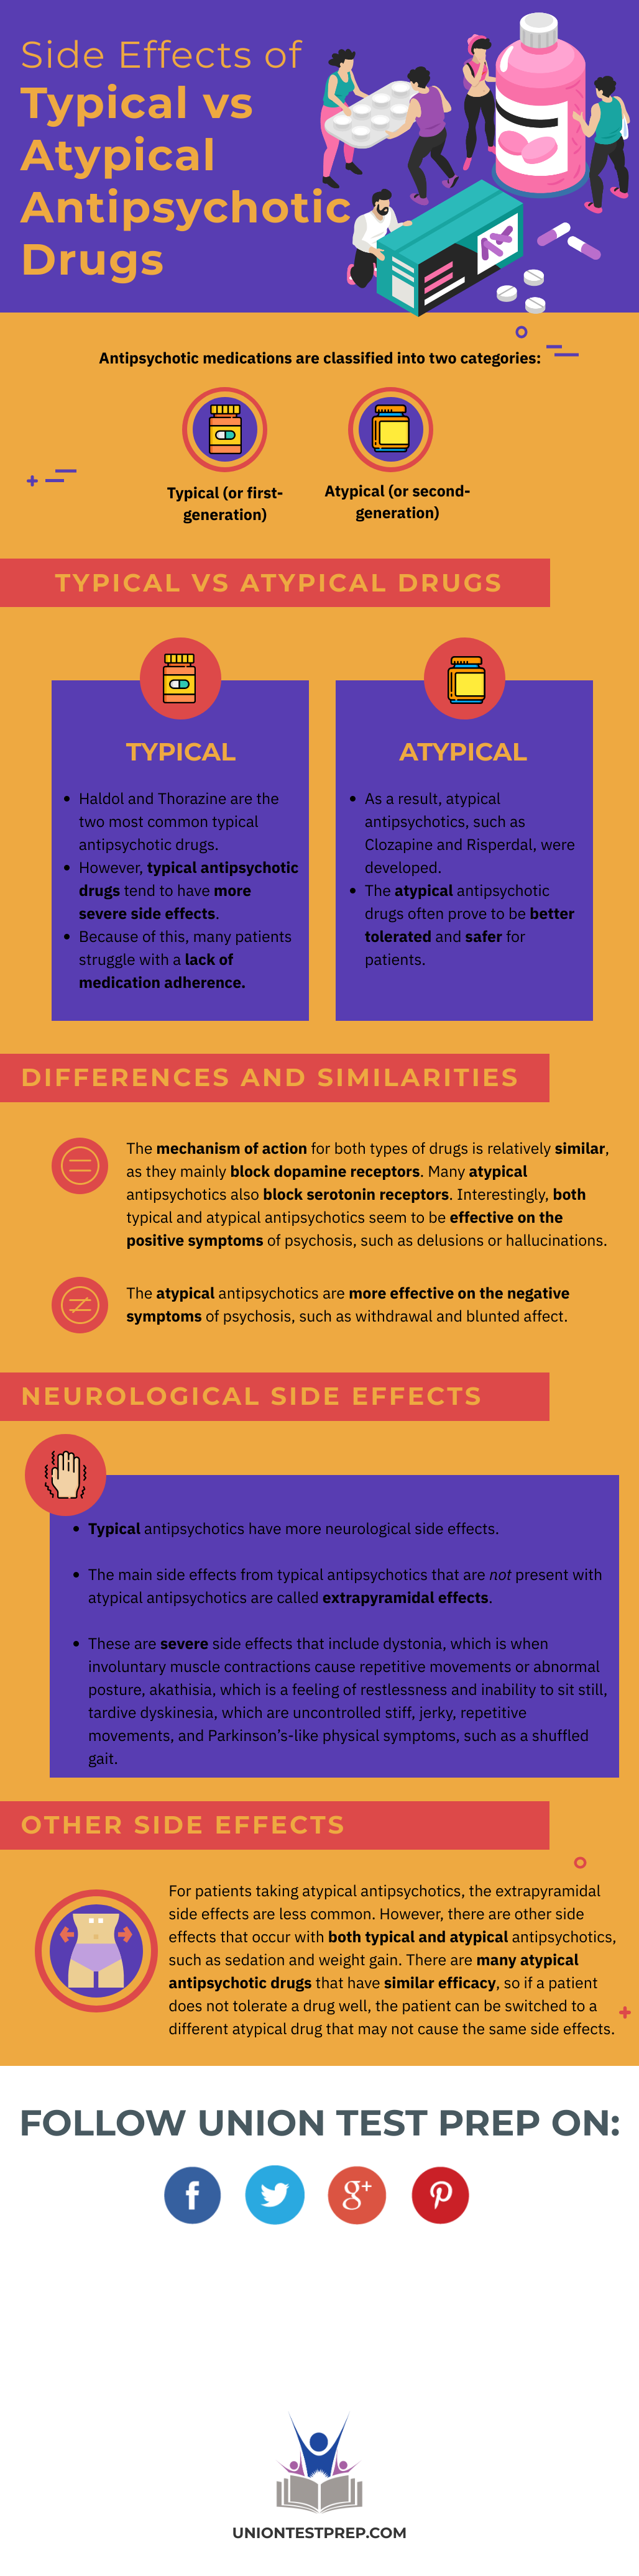 Atypical and Typical Antipsychotics